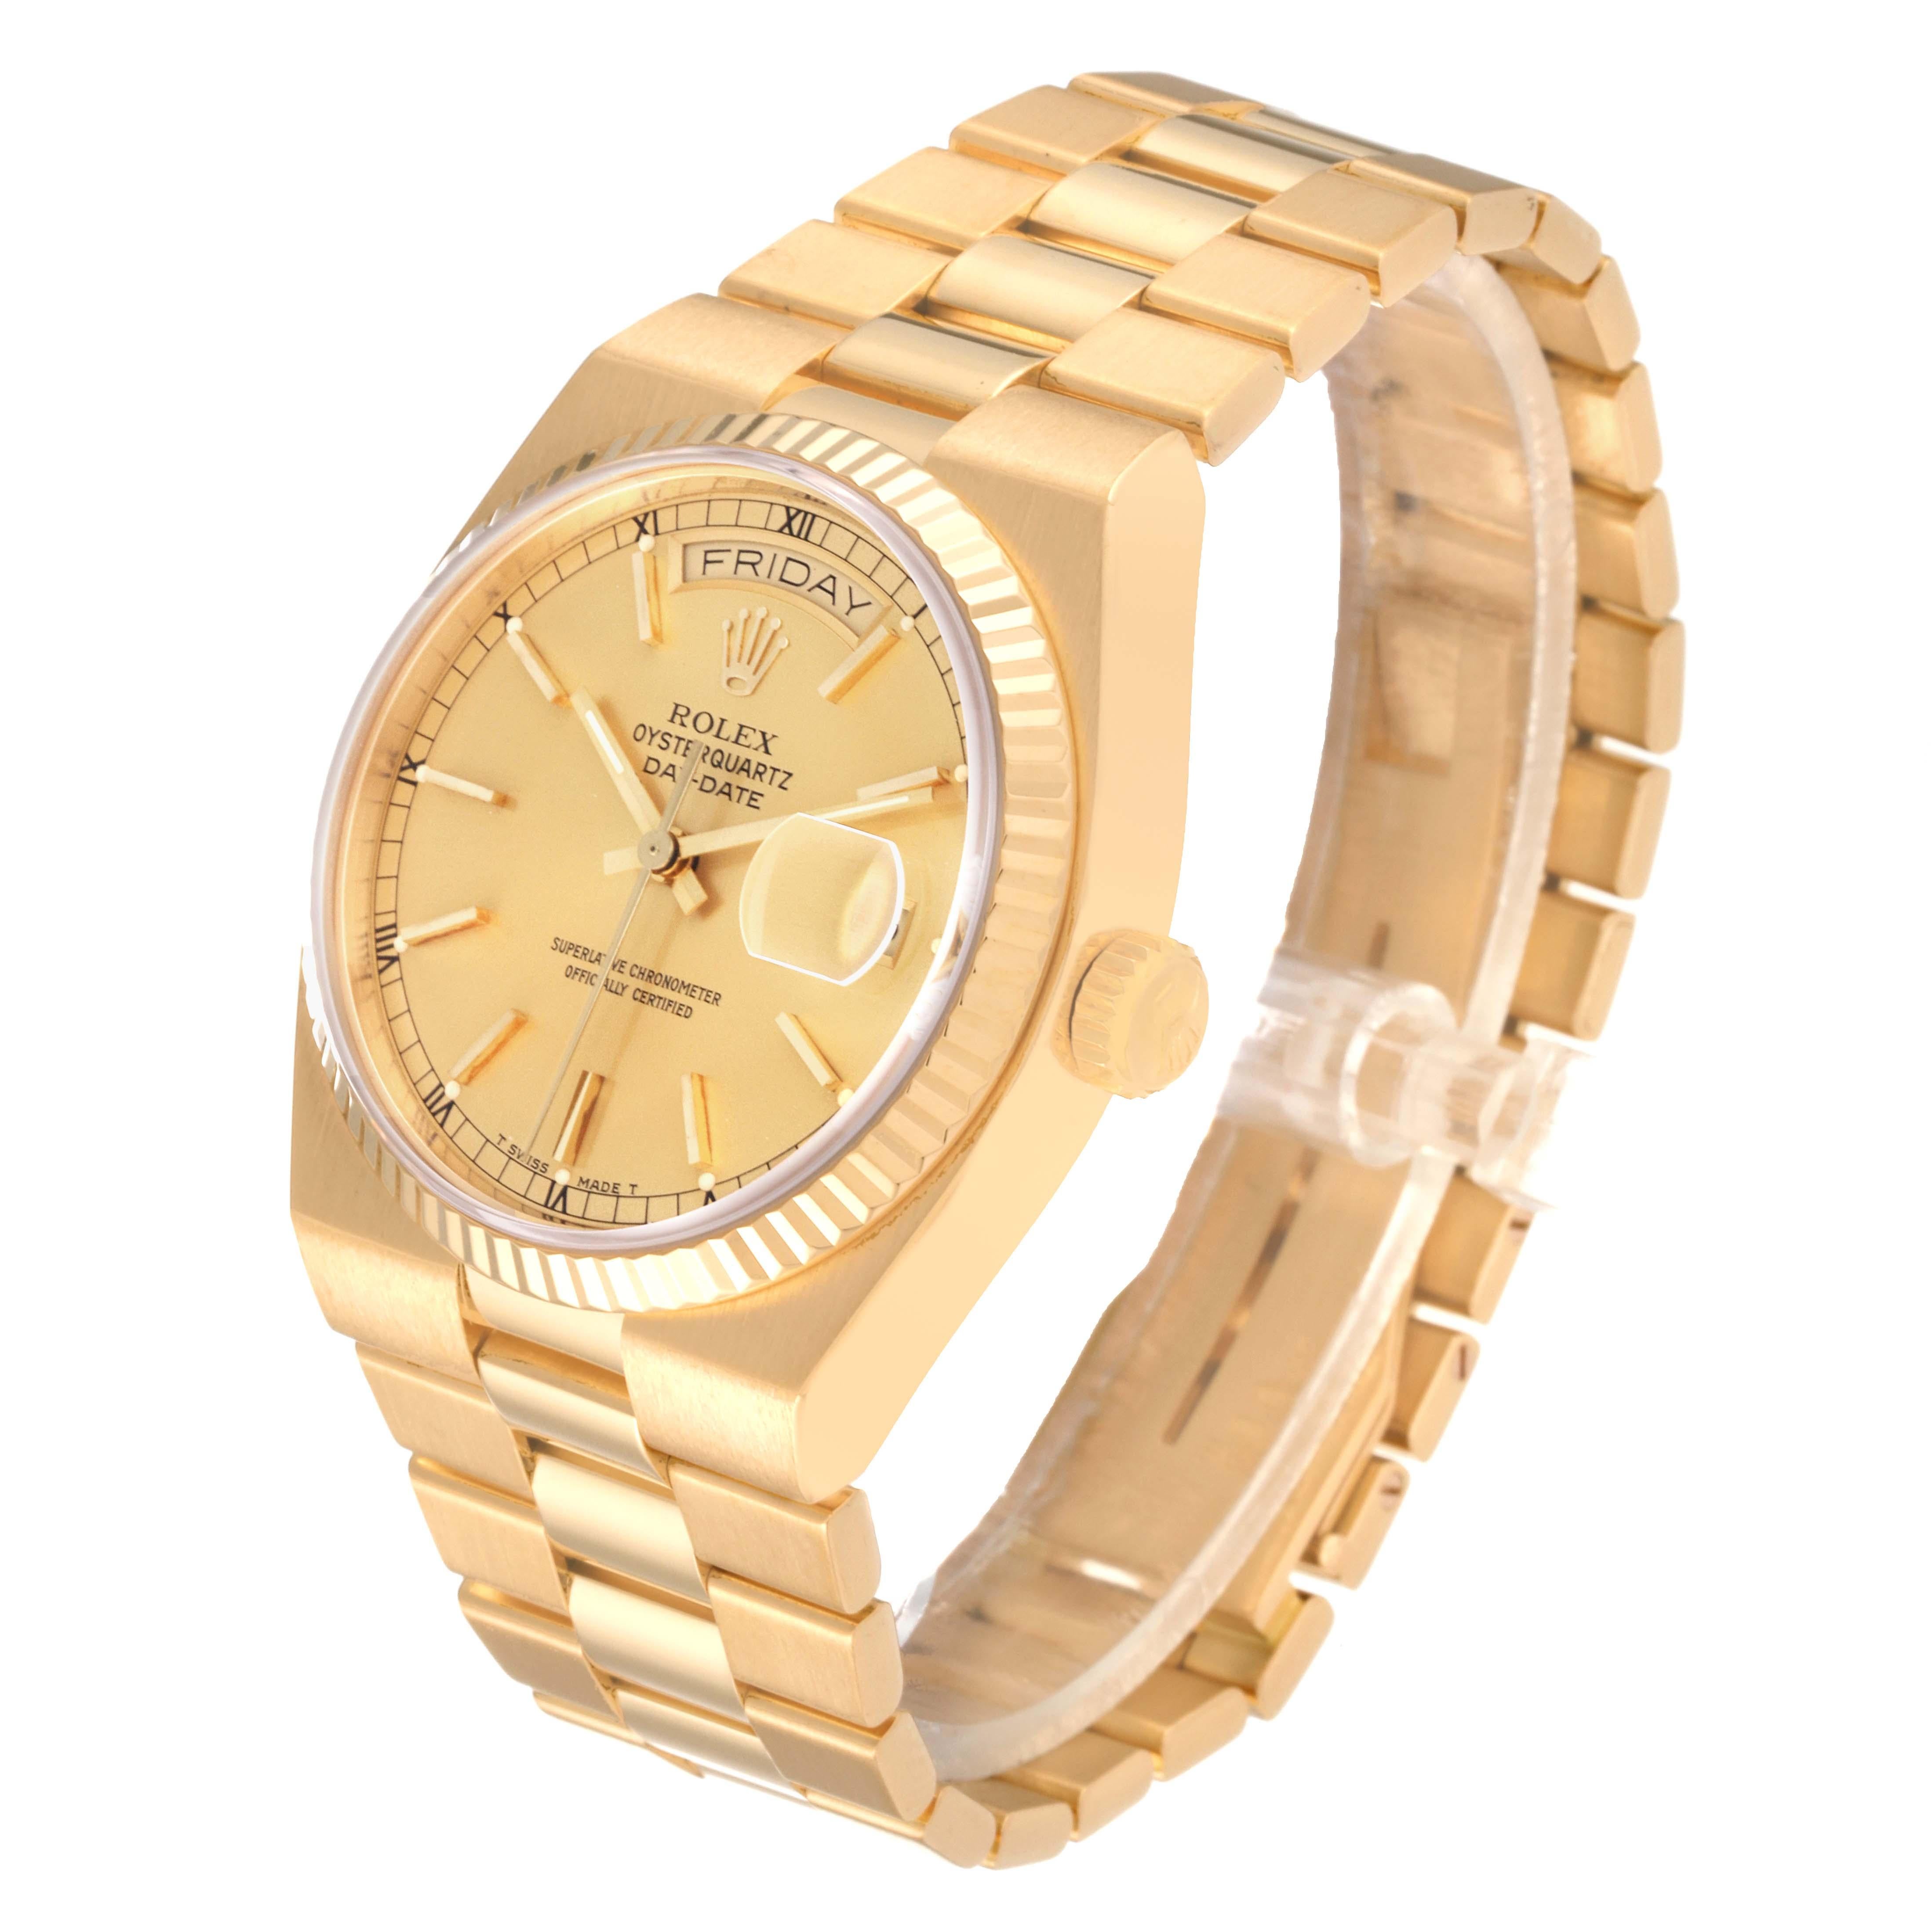 Rolex Oysterquartz President Day-Date Yellow Gold Mens Watch 19018 In Excellent Condition For Sale In Atlanta, GA